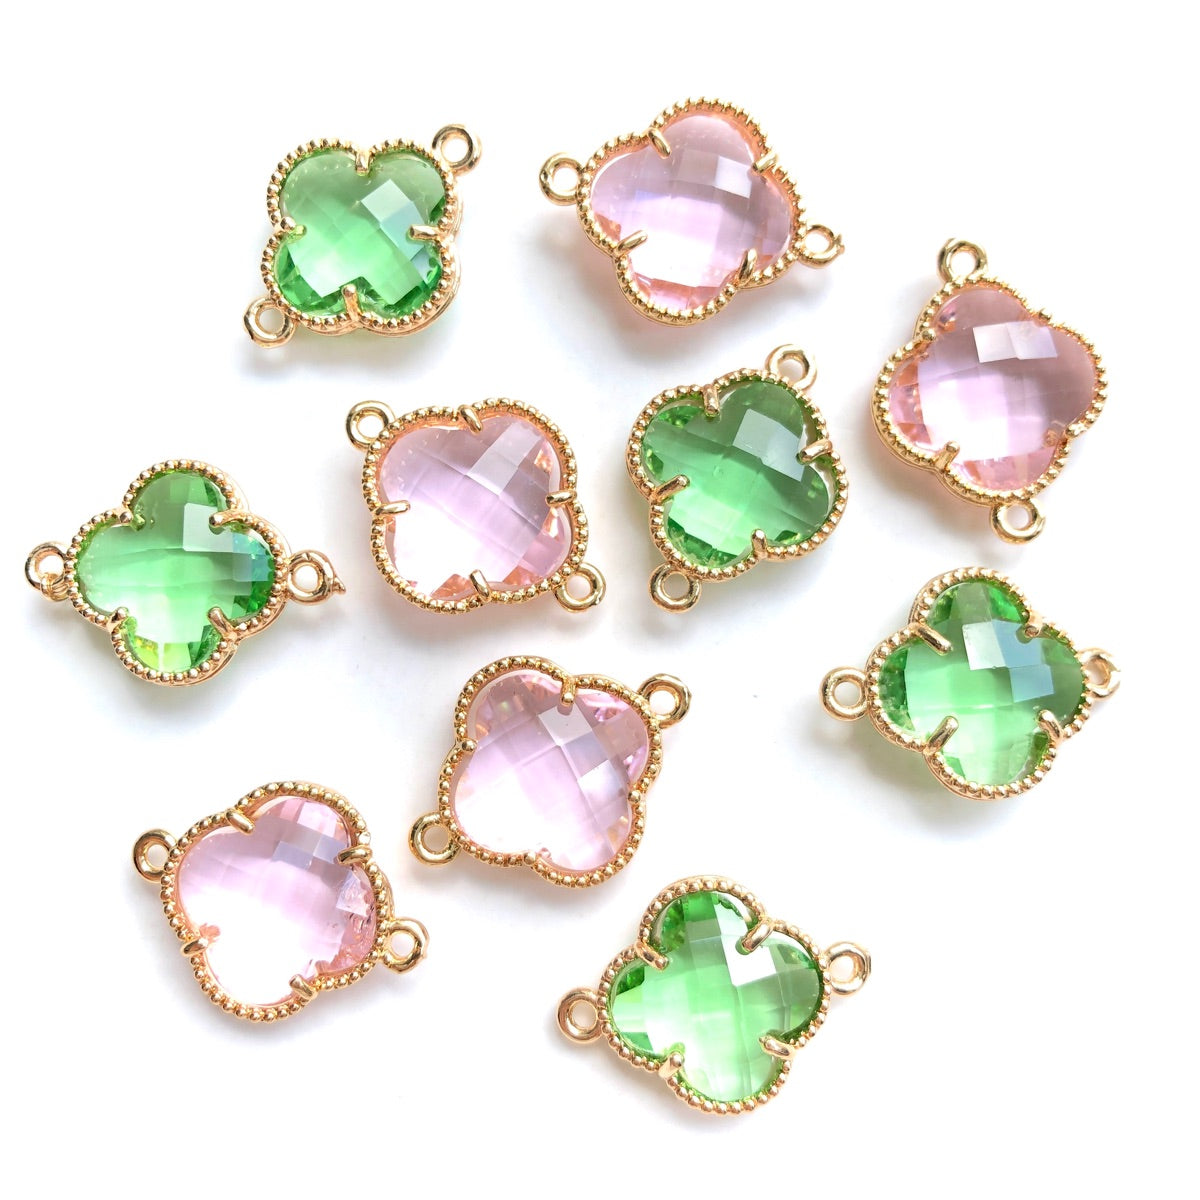 10pcs/Lot Gold Plated Glass Crystal Clover Flower Connectors Mix Pink Green Stone Charms Flower Glass Beads New Charms Arrivals Charms Beads Beyond